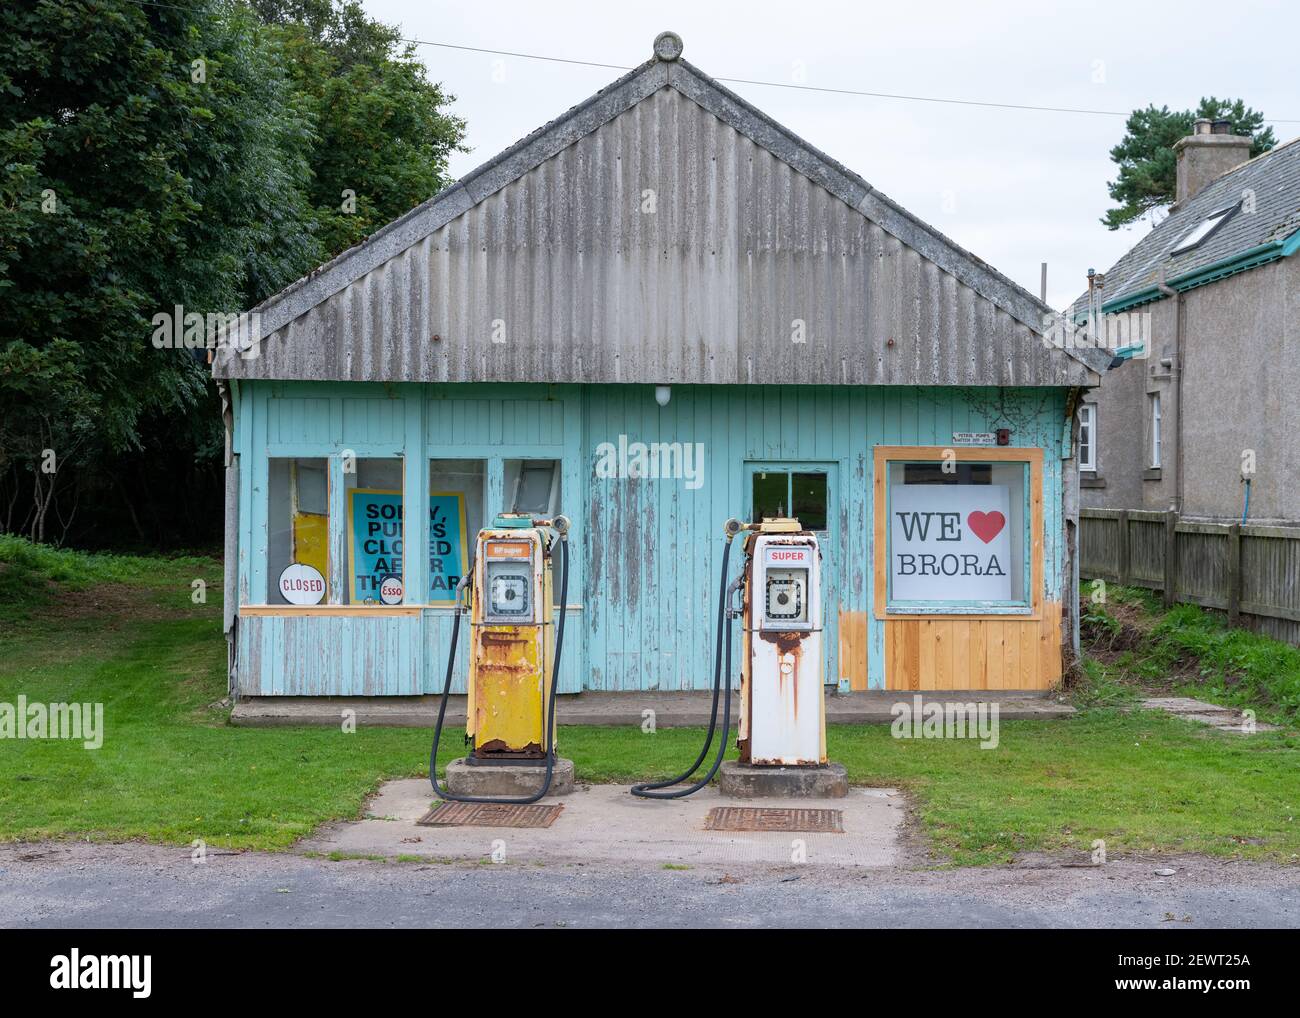 An old, long abandoned petrol station in the town of Brora, Sutherland, Scotland, UK. Stock Photo